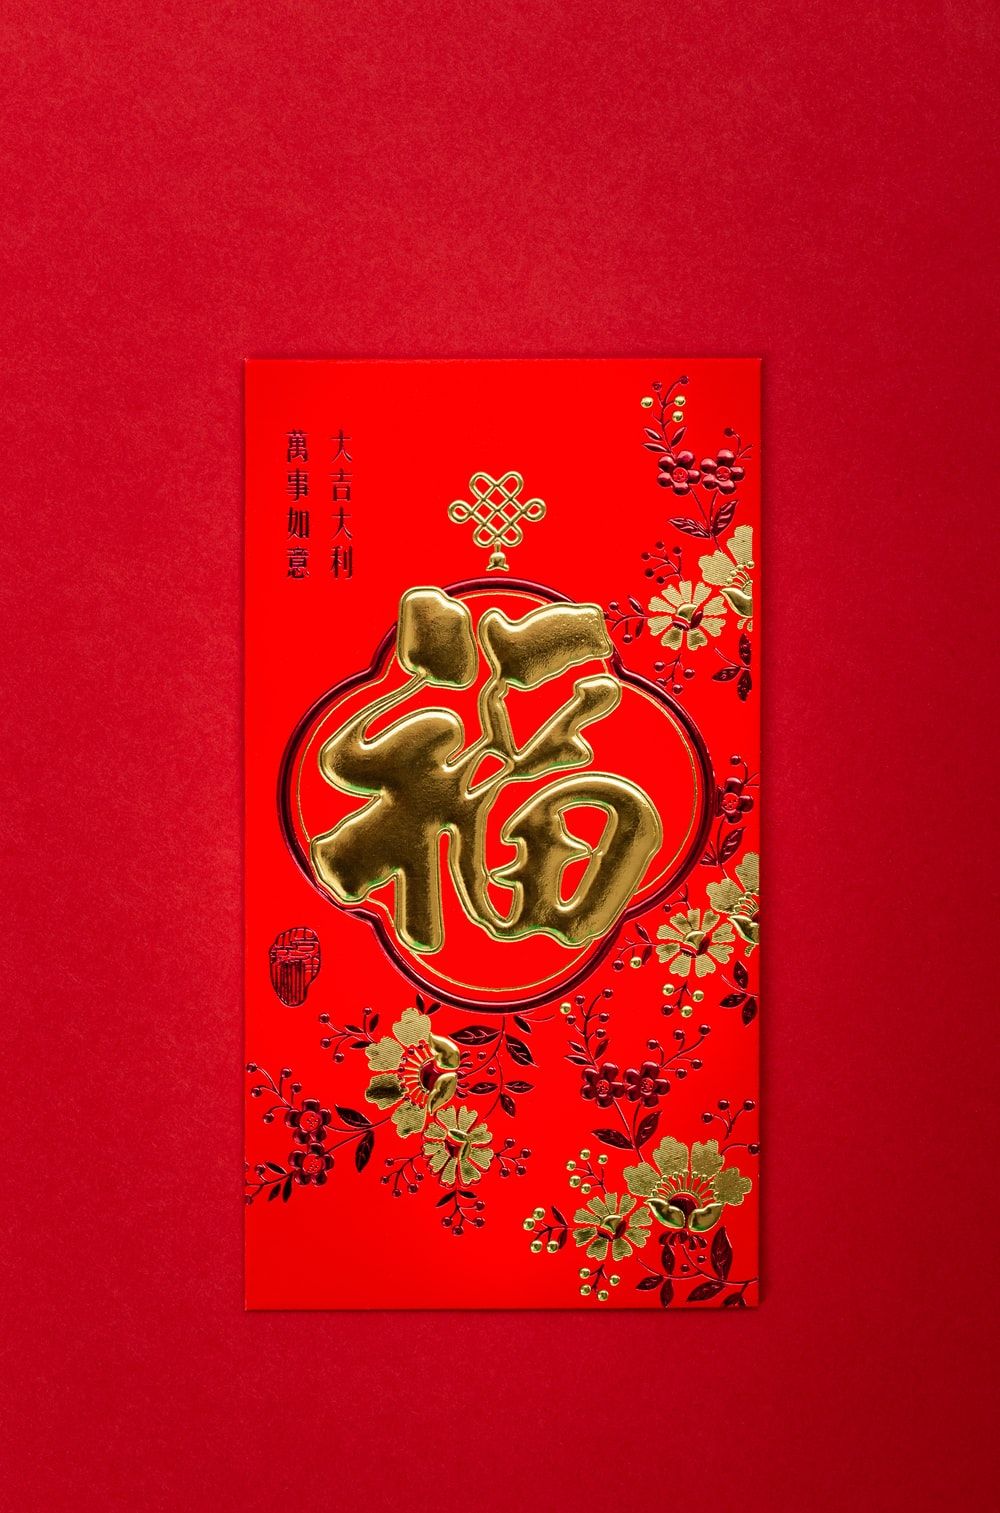 Chinese New Year Picture. Download Free Image